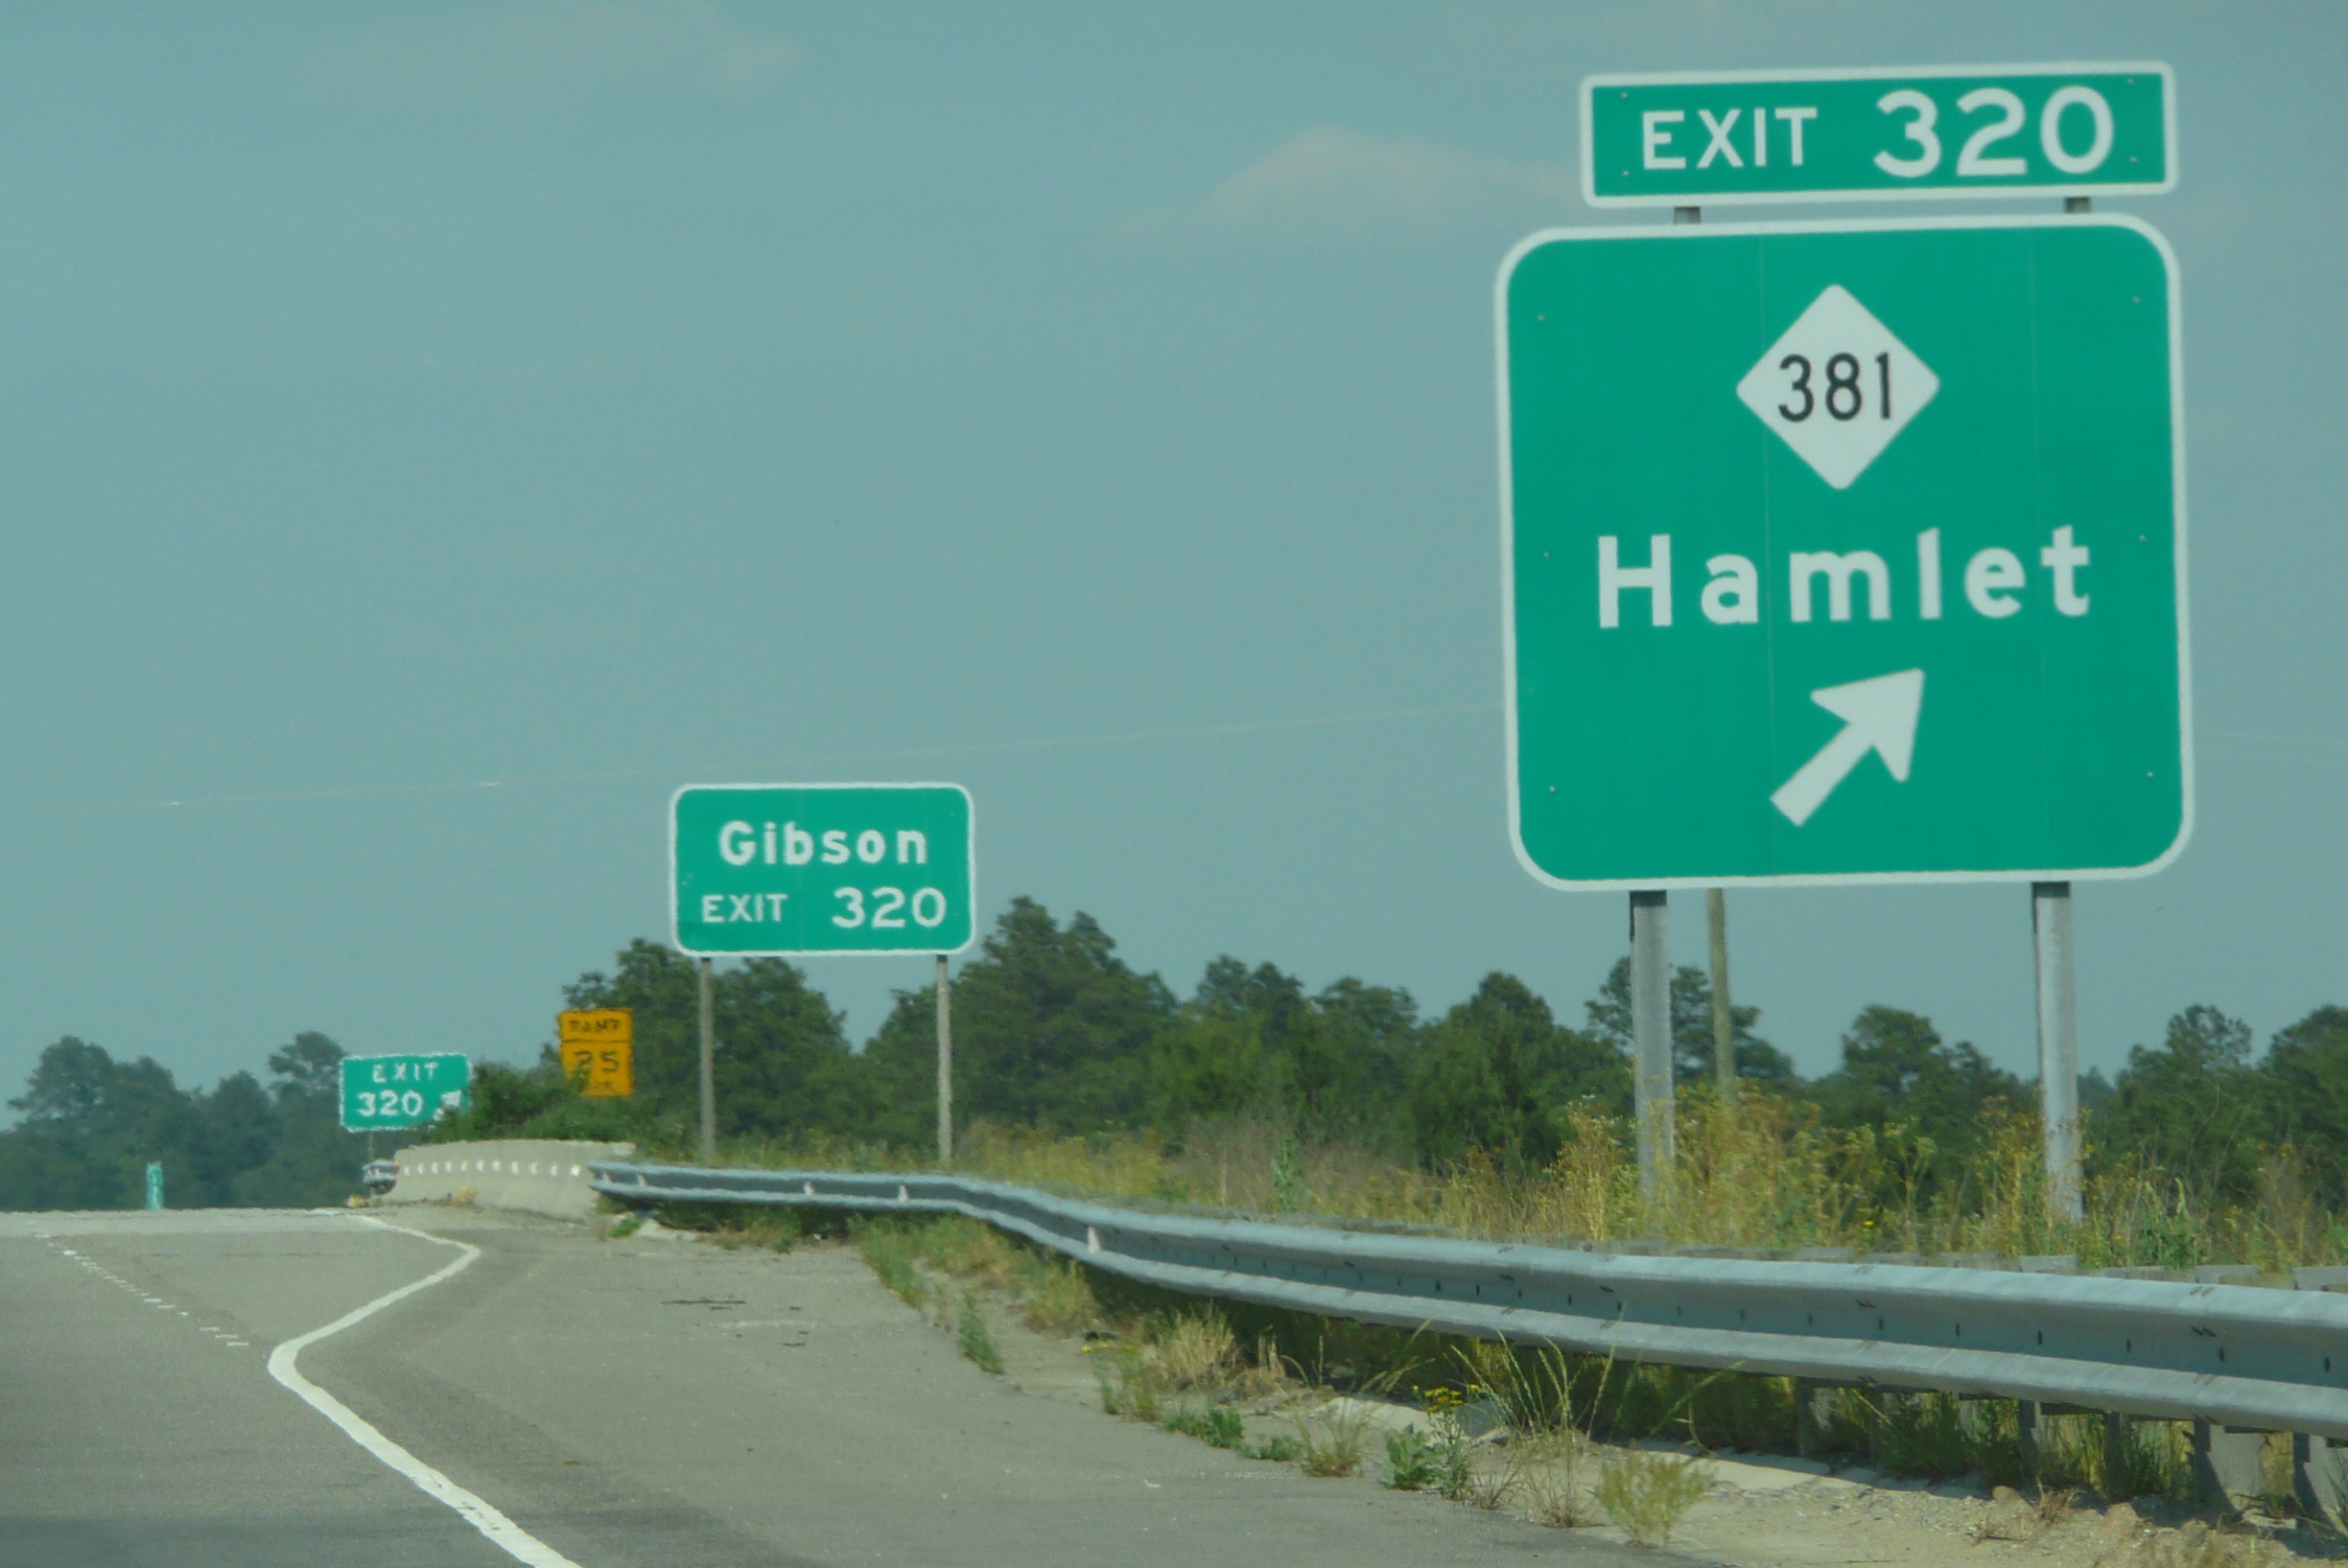 Photo of exit signage for the NC 381 Exit along the US 74 Rockingham
Bypass in 2009, Courtesy of James Mast